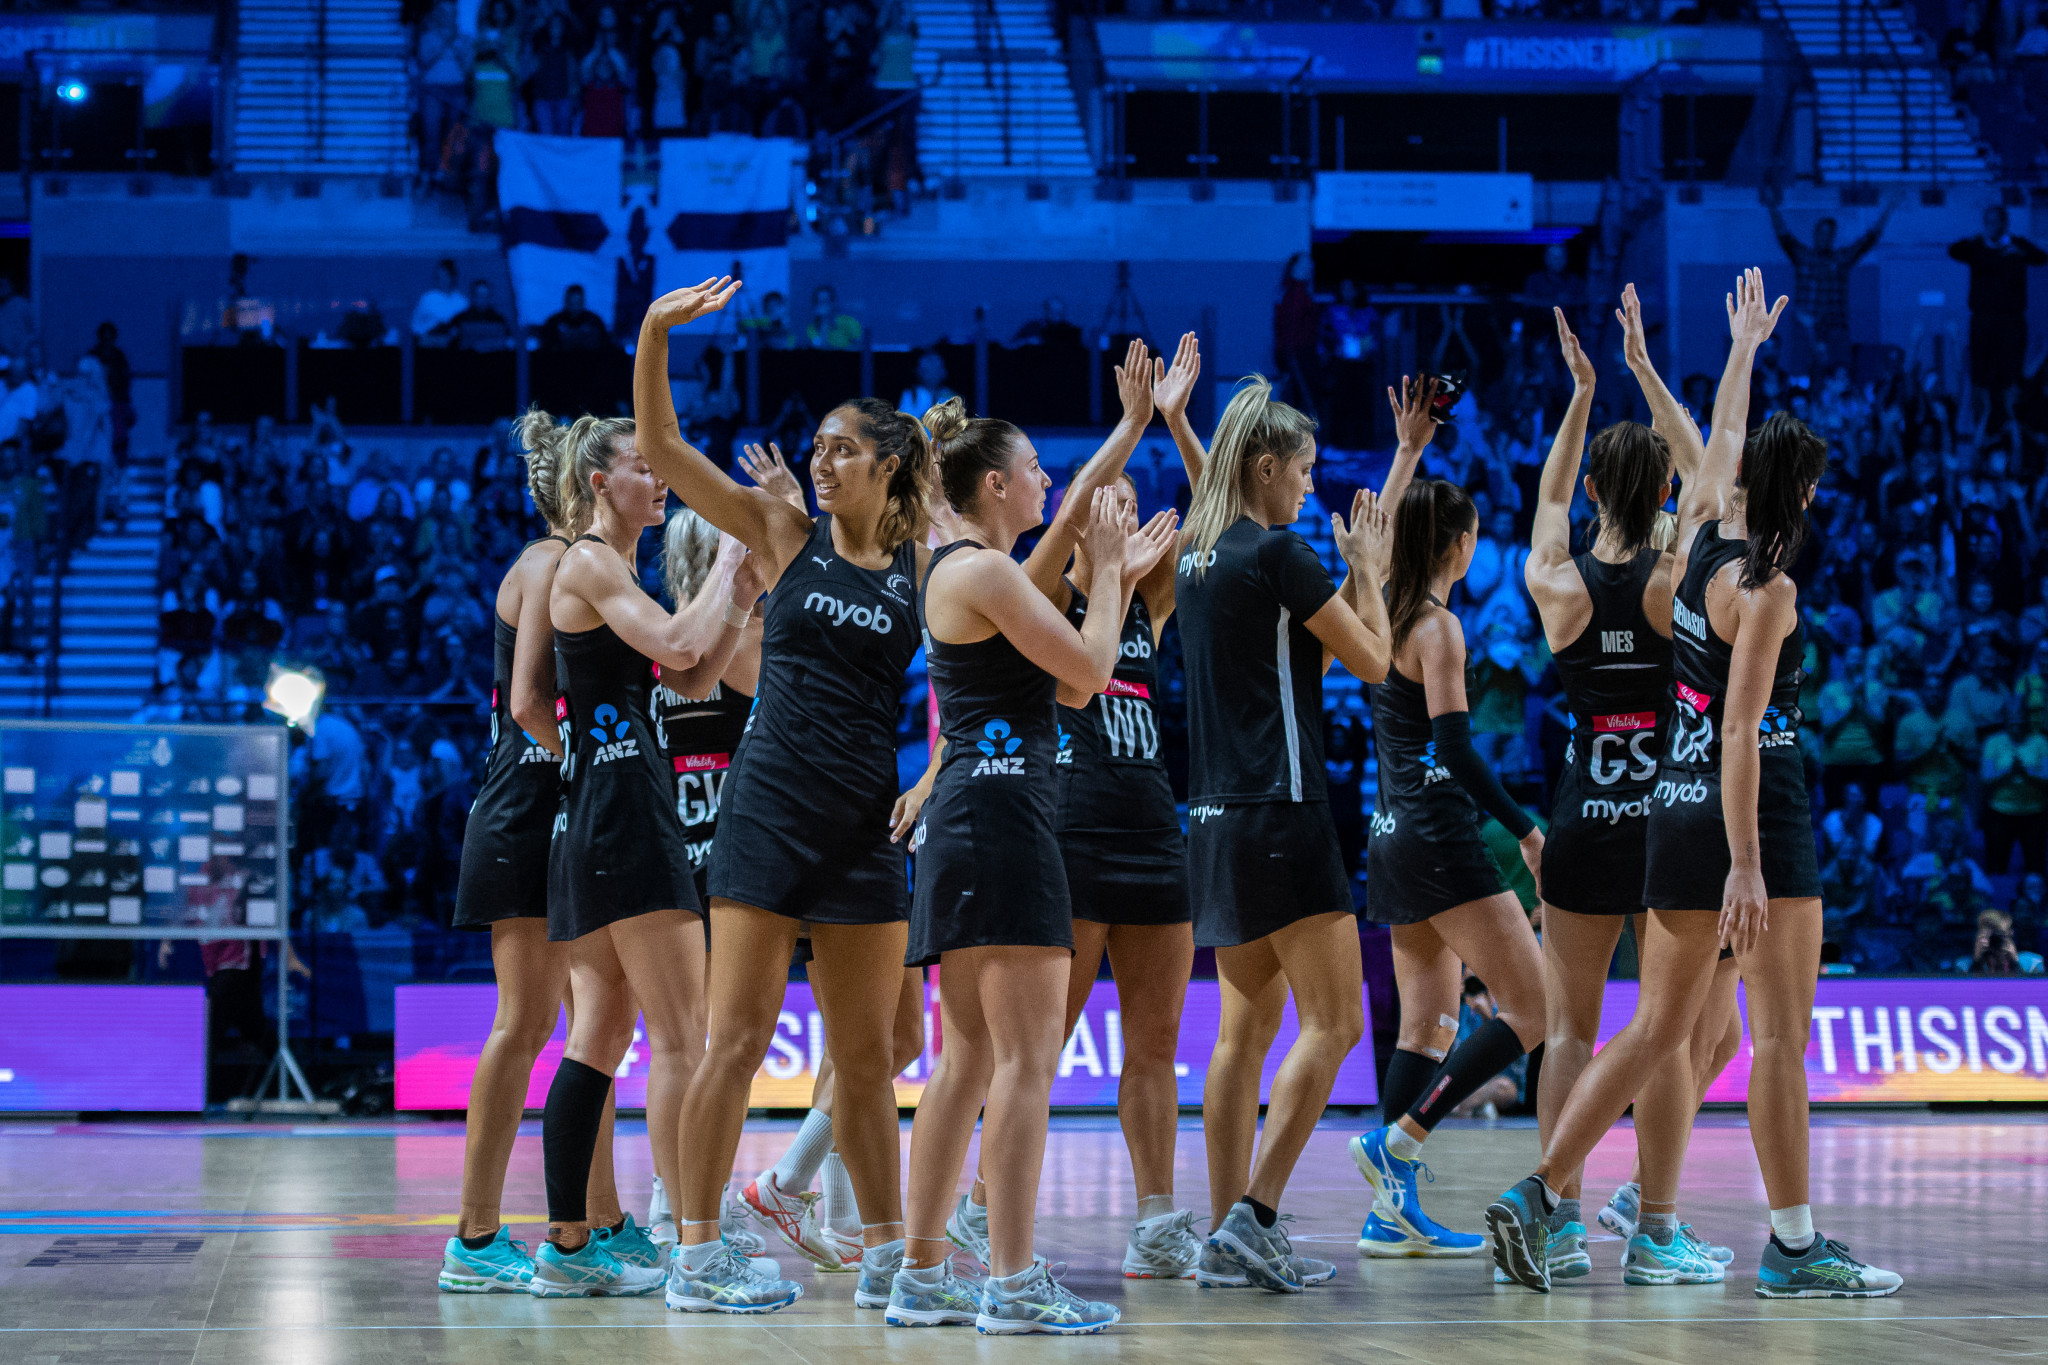 The New Zealand team which competed at the 2019 Netball World Cup has been nominated for the Decade Champion accolade ©Getty Images